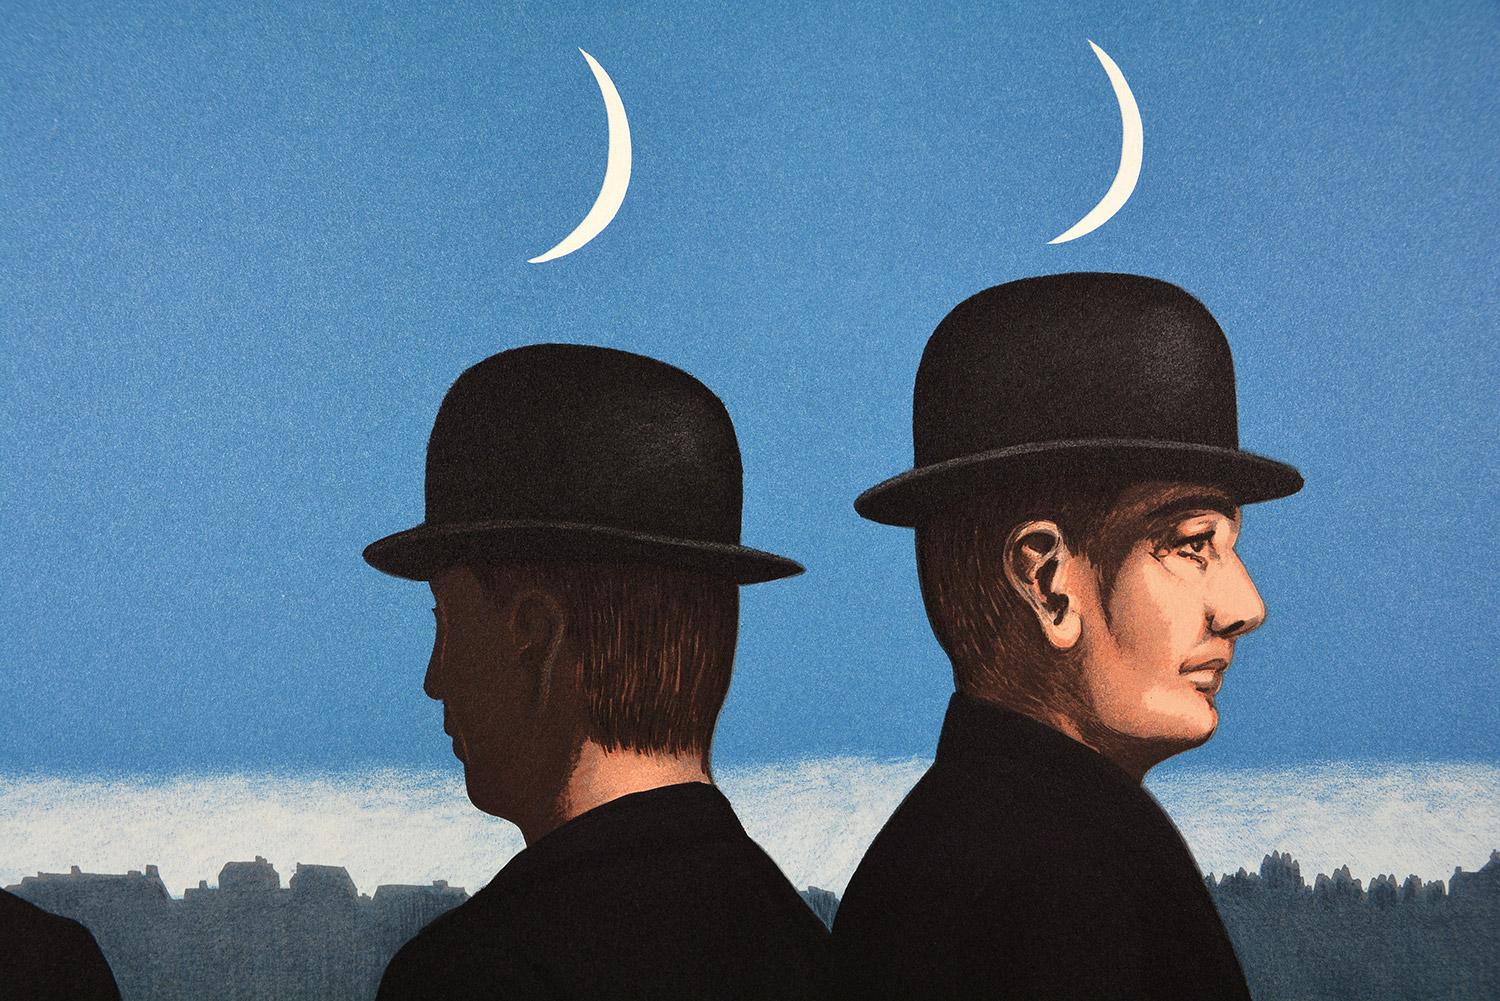 René Magritte - LE CHEF D'OEUVRE OU LES MYSTÈRES DE L'HORIZON, 1965
Date of creation: 2010
Medium: Lithograph on BFK Rives Paper
Edition number: 131/275
Size: 60 x 45 cm
Condition: New, in mint condition and never framed
Observations: Lithograph on